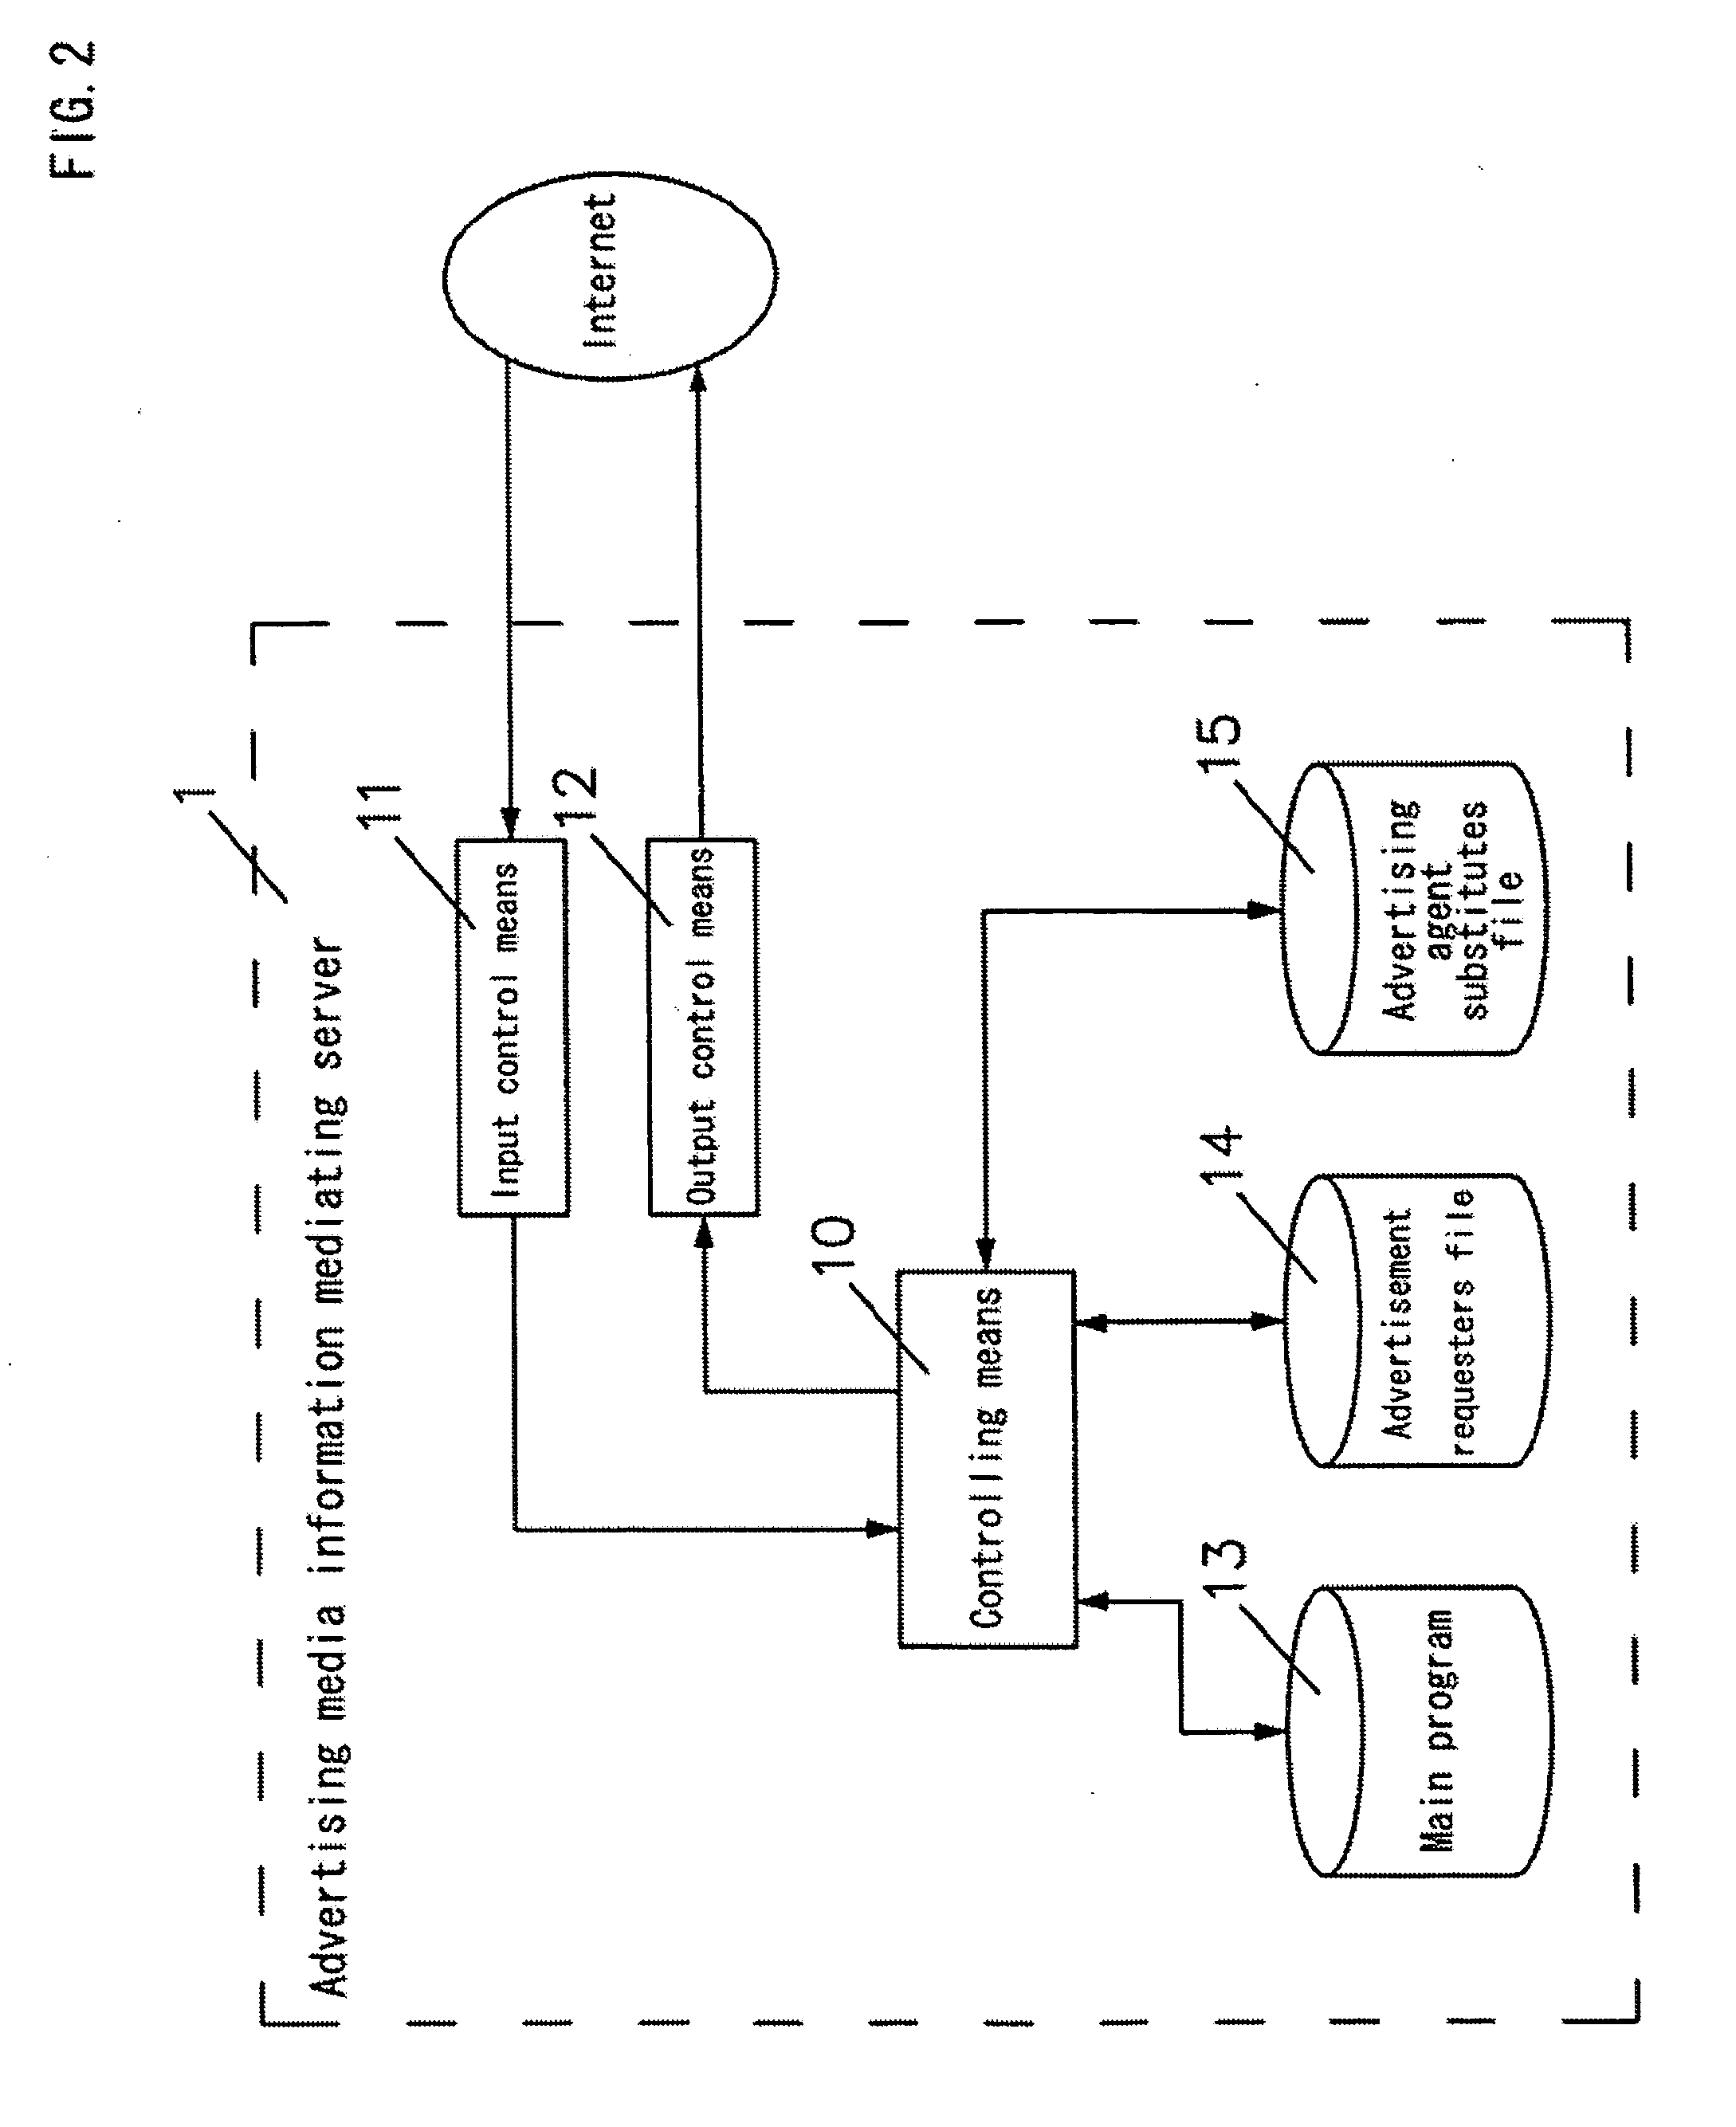 Advertisement proxy method and advertisement proxy mediating system